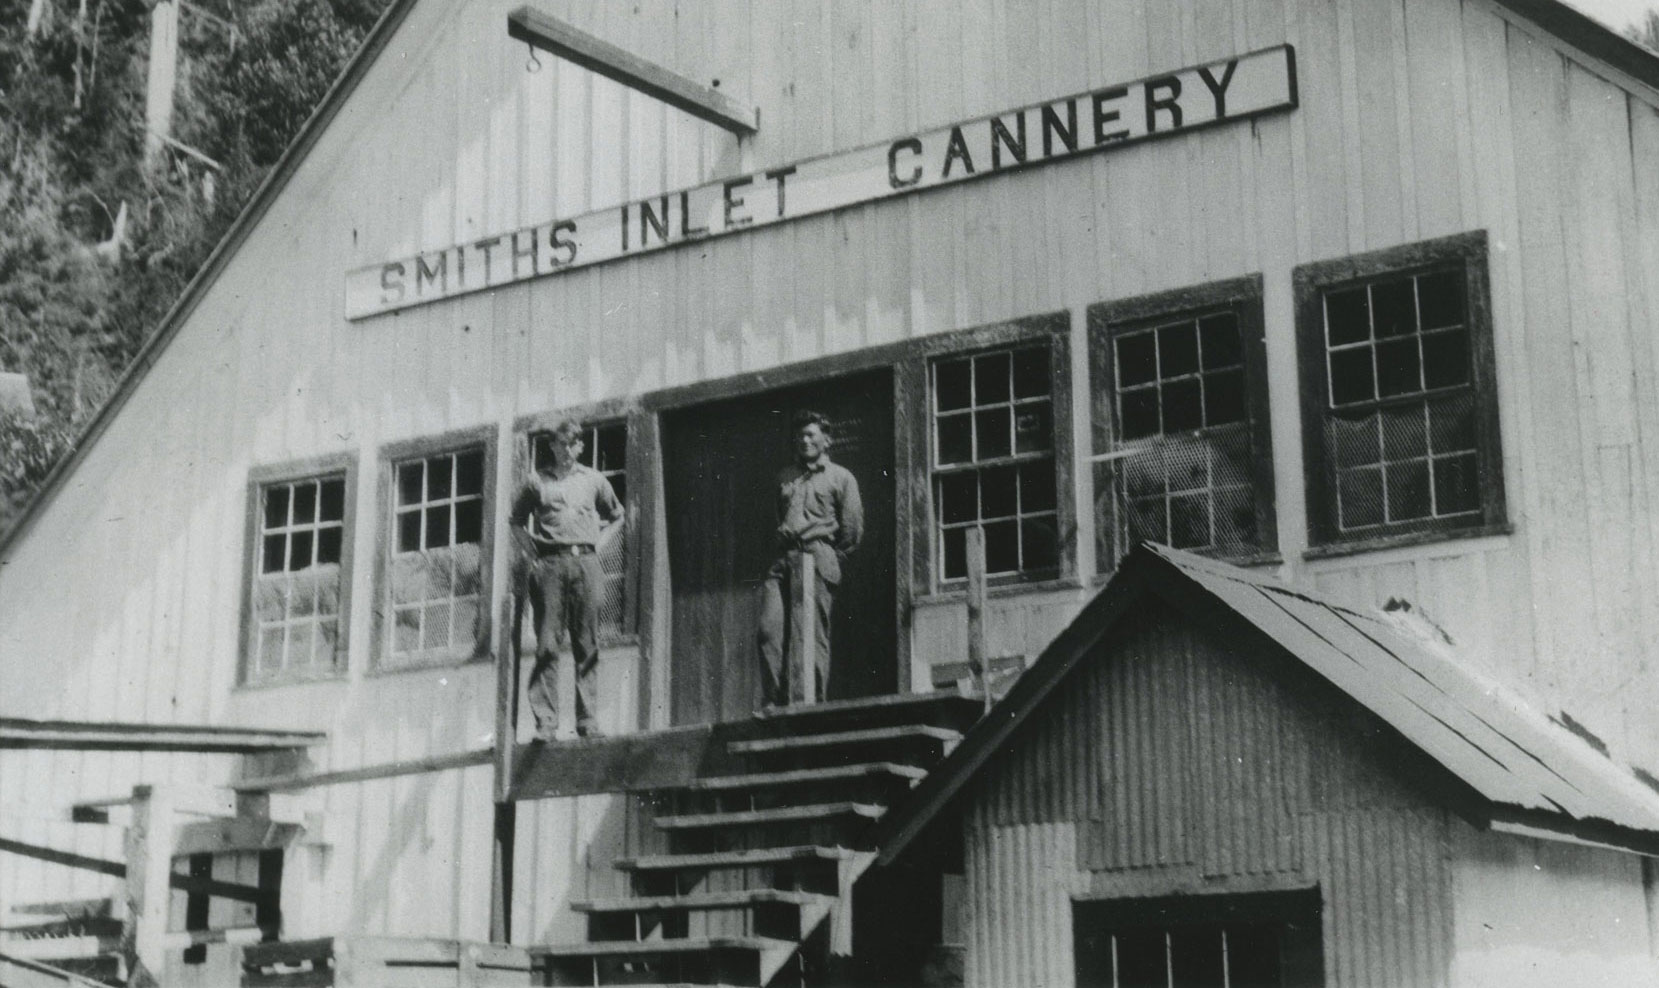 Two men stand at the top of steps leading into the wooden cannery building